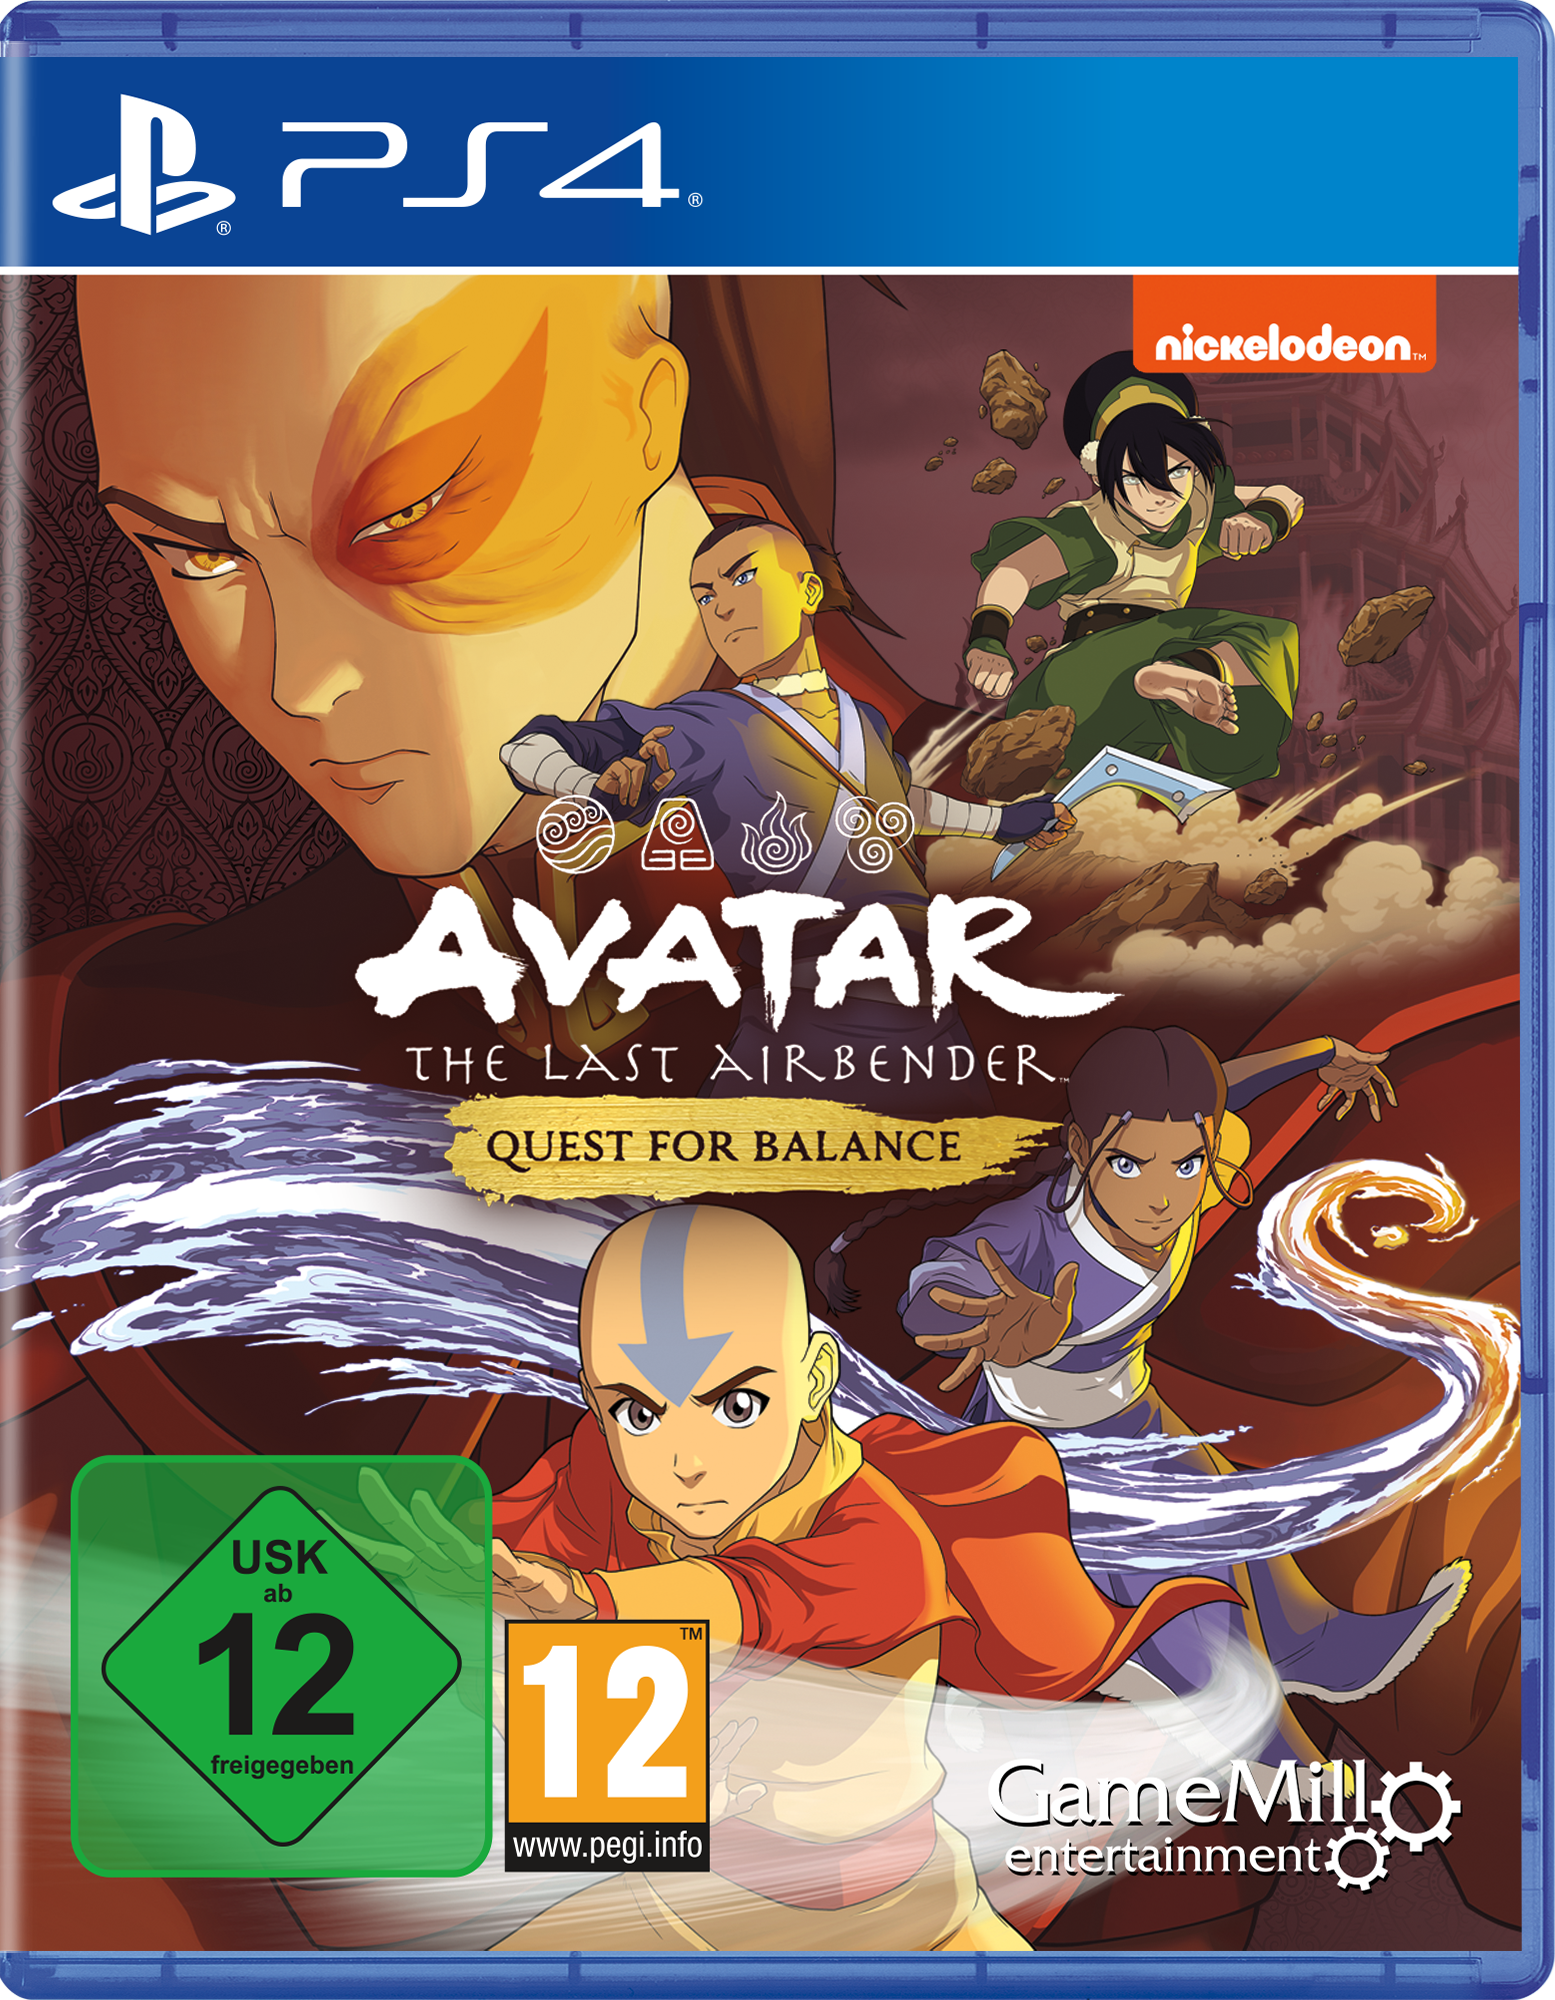 PS4 AVATAR THE LAST For Balance Quest For [PlayStation 4] AIRBENDER - Balance Quest